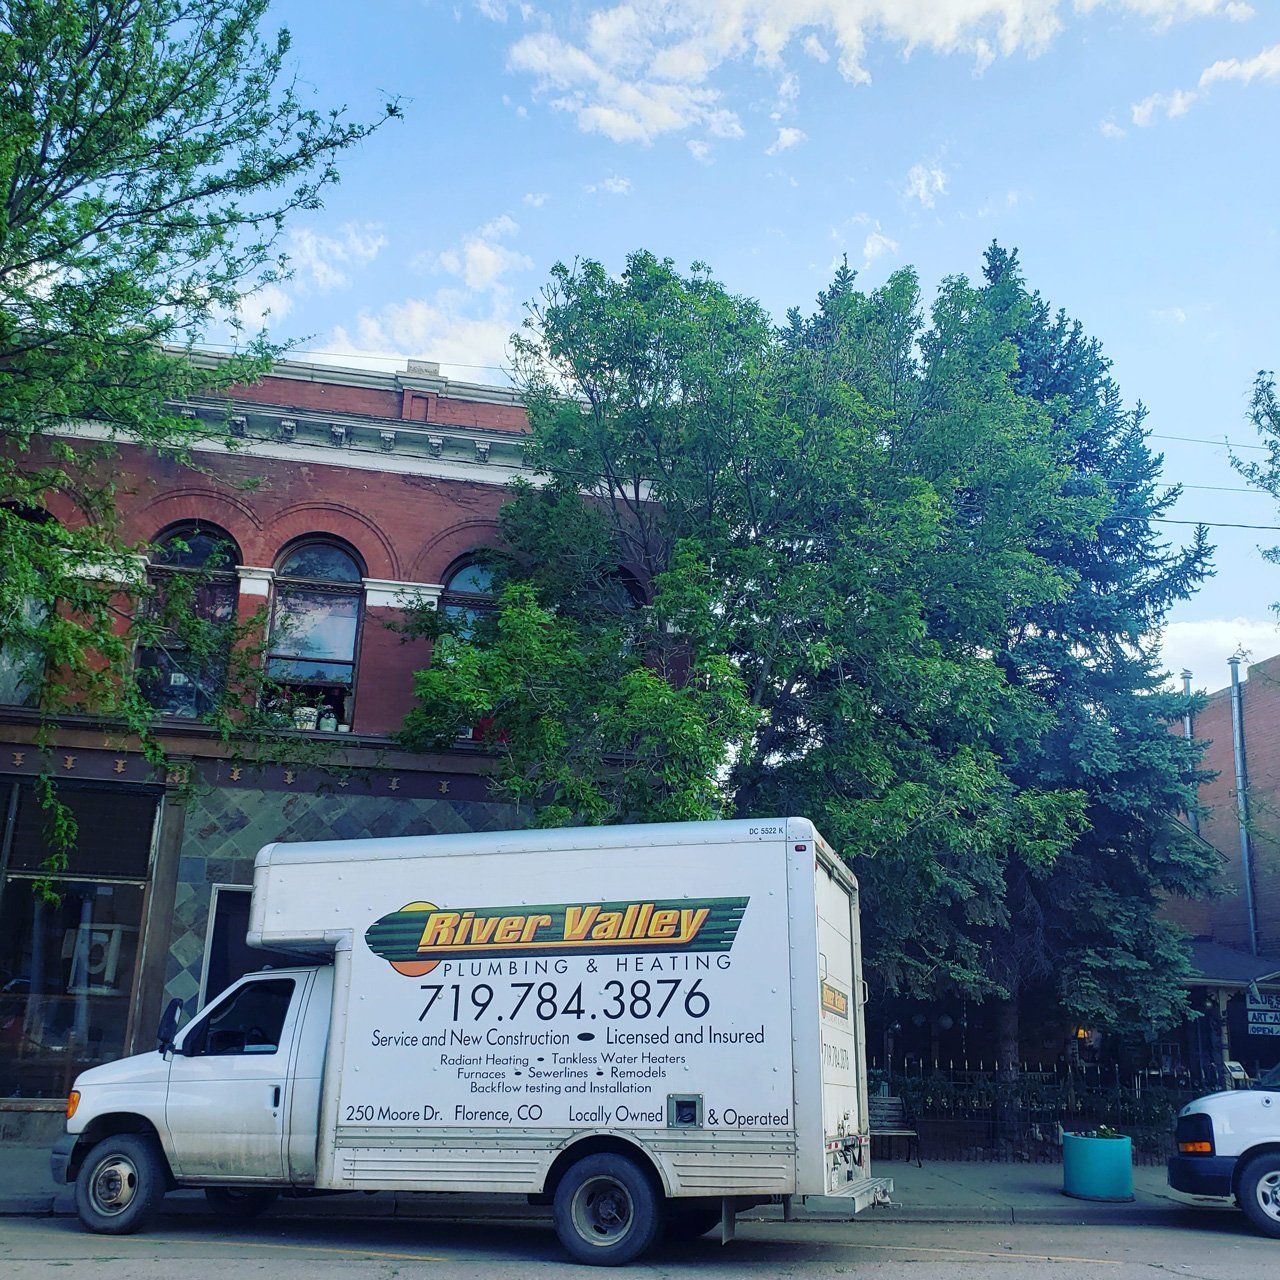 Service Truck Outside The Building — Florence, CO — River Valley Plumbing And Heating LLC